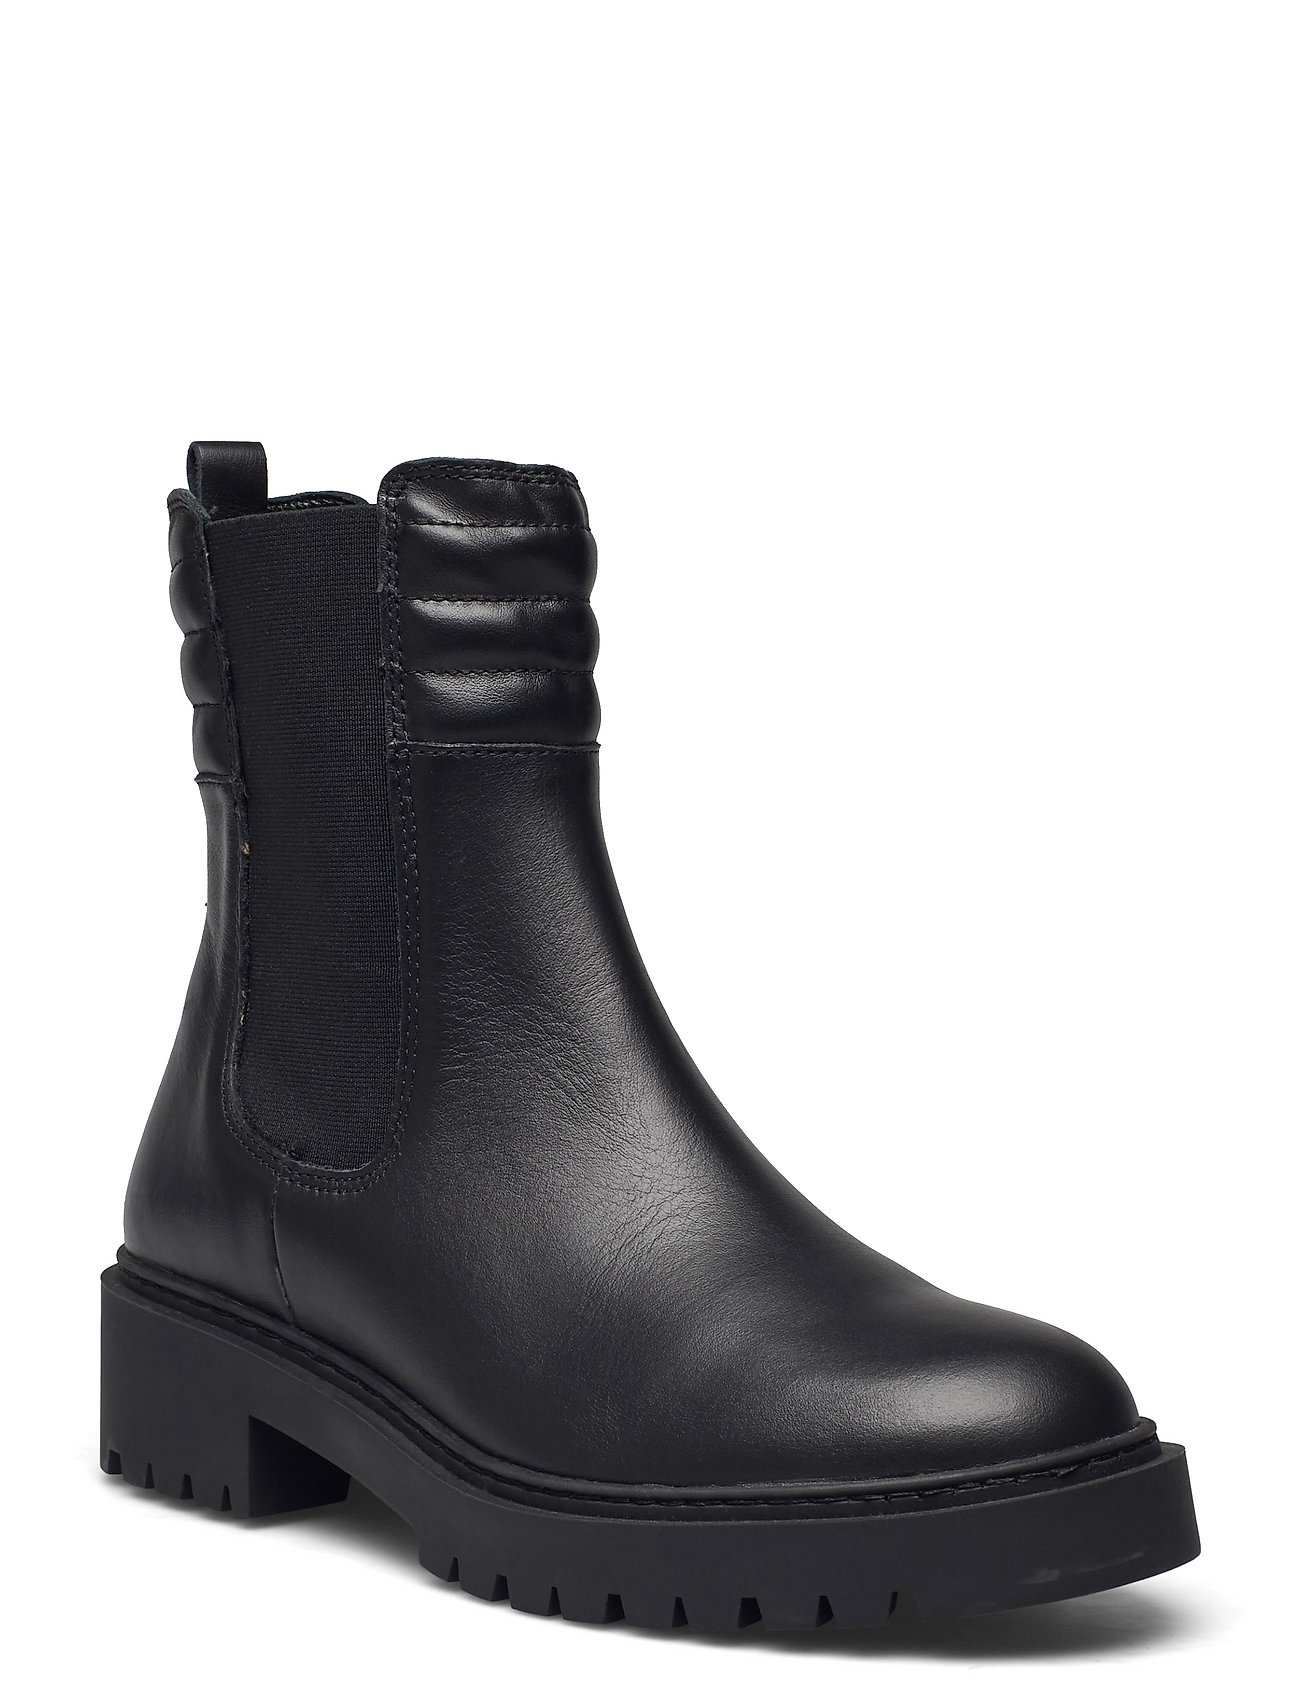 Greek_f21_nf Shoes Chelsea Boots Musta UNISA